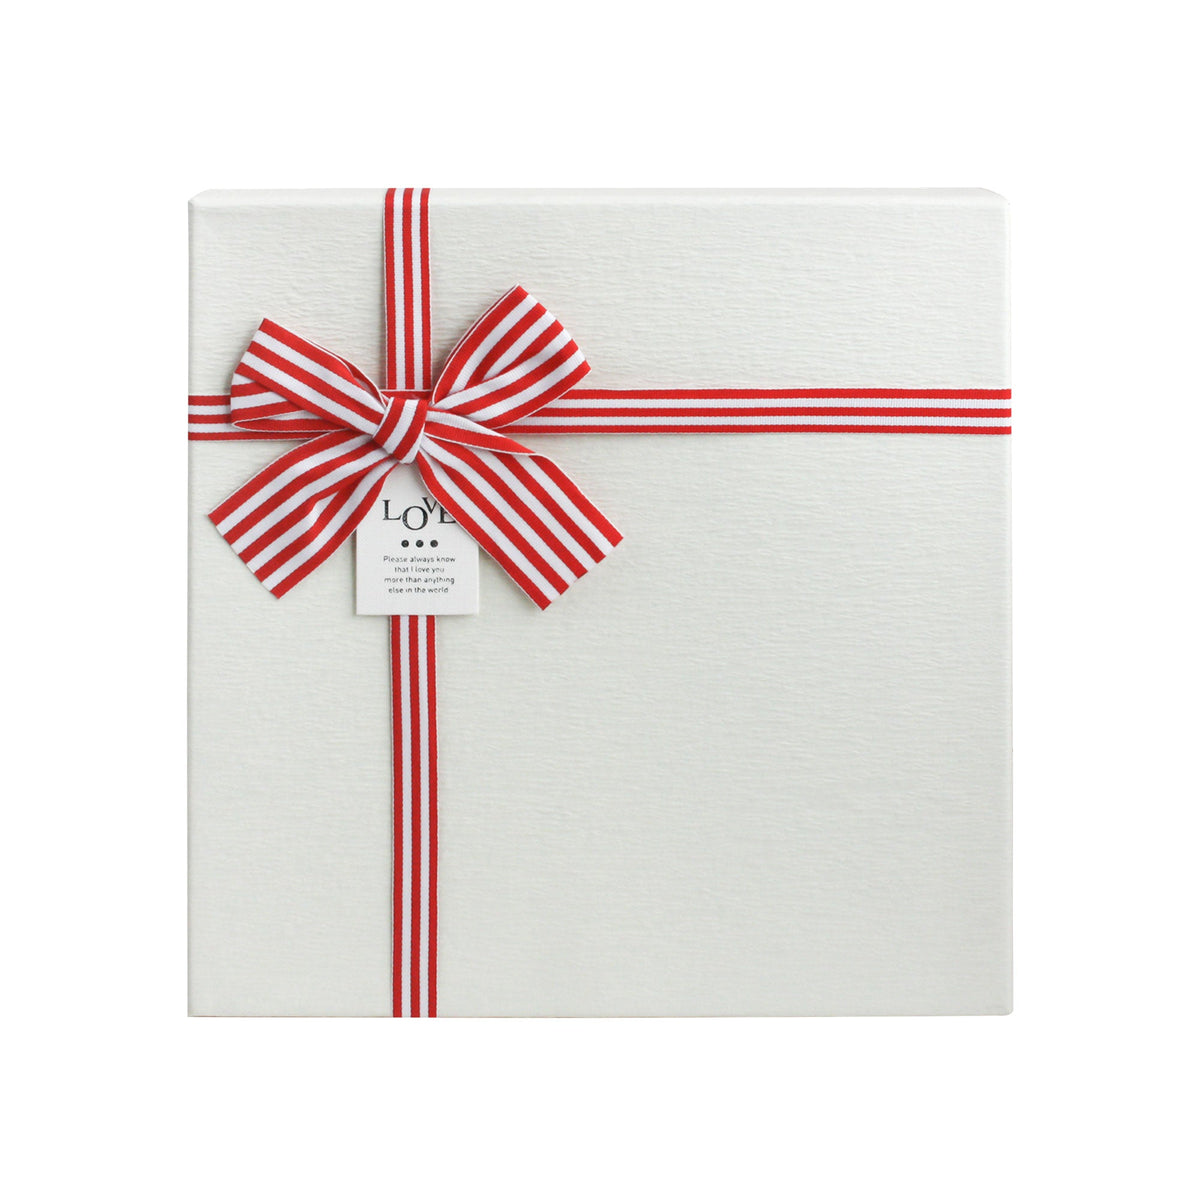 Single White Striped Bow Gift Box (Sizes Available)